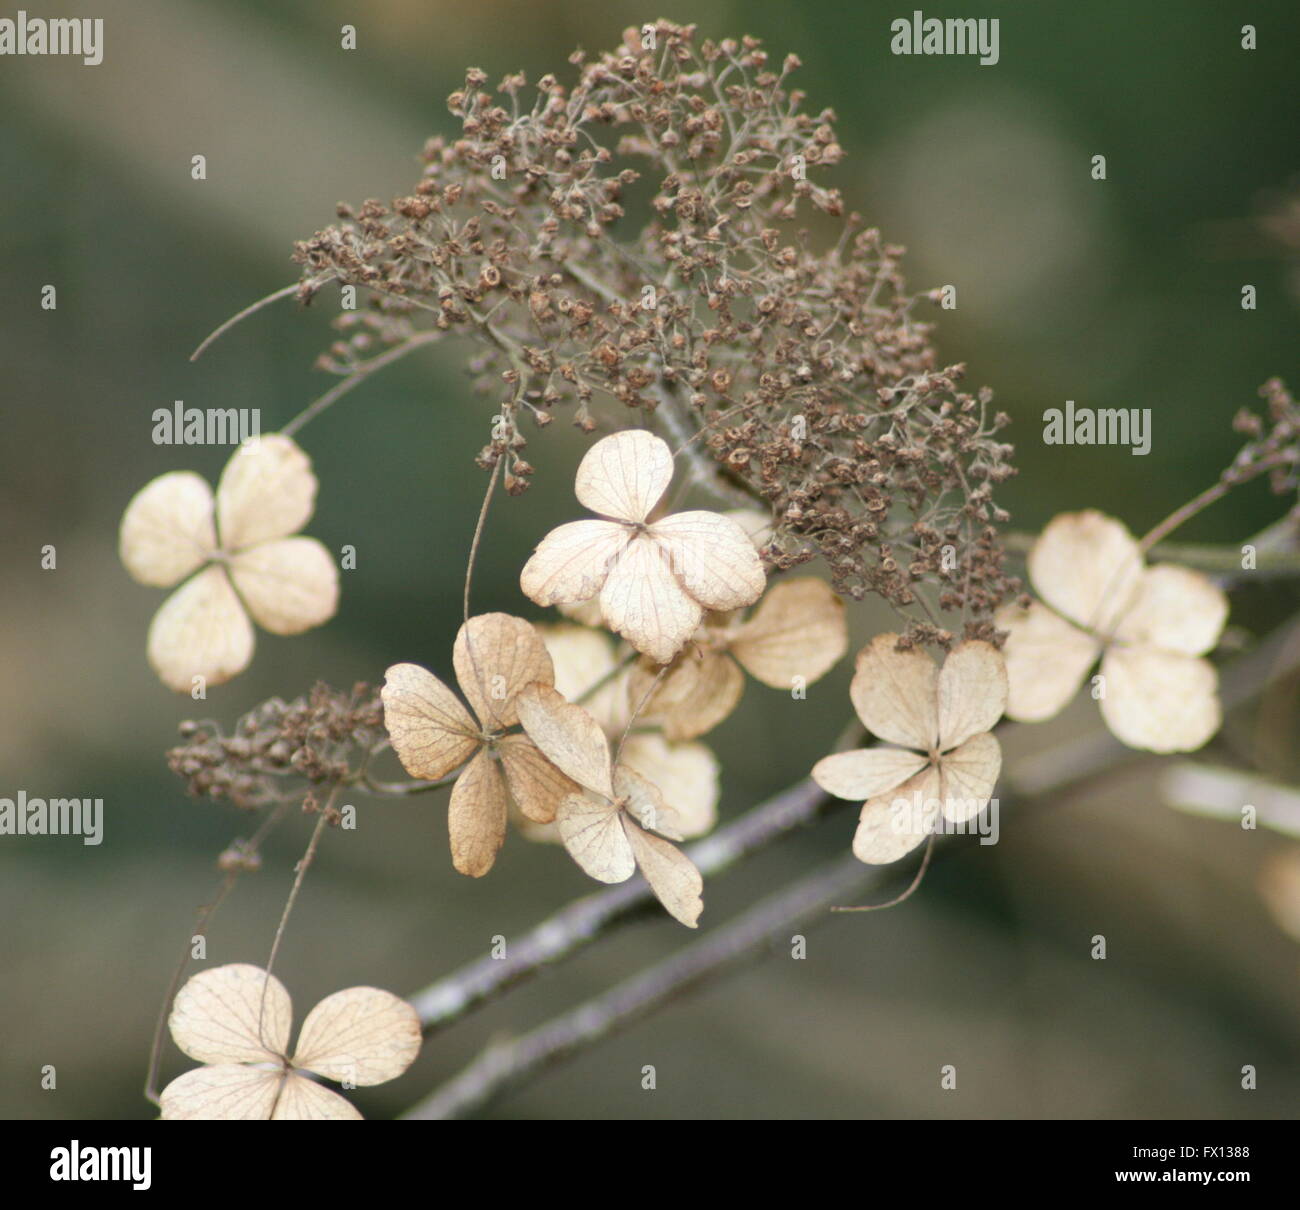 Dried flowers on a branch Stock Photo